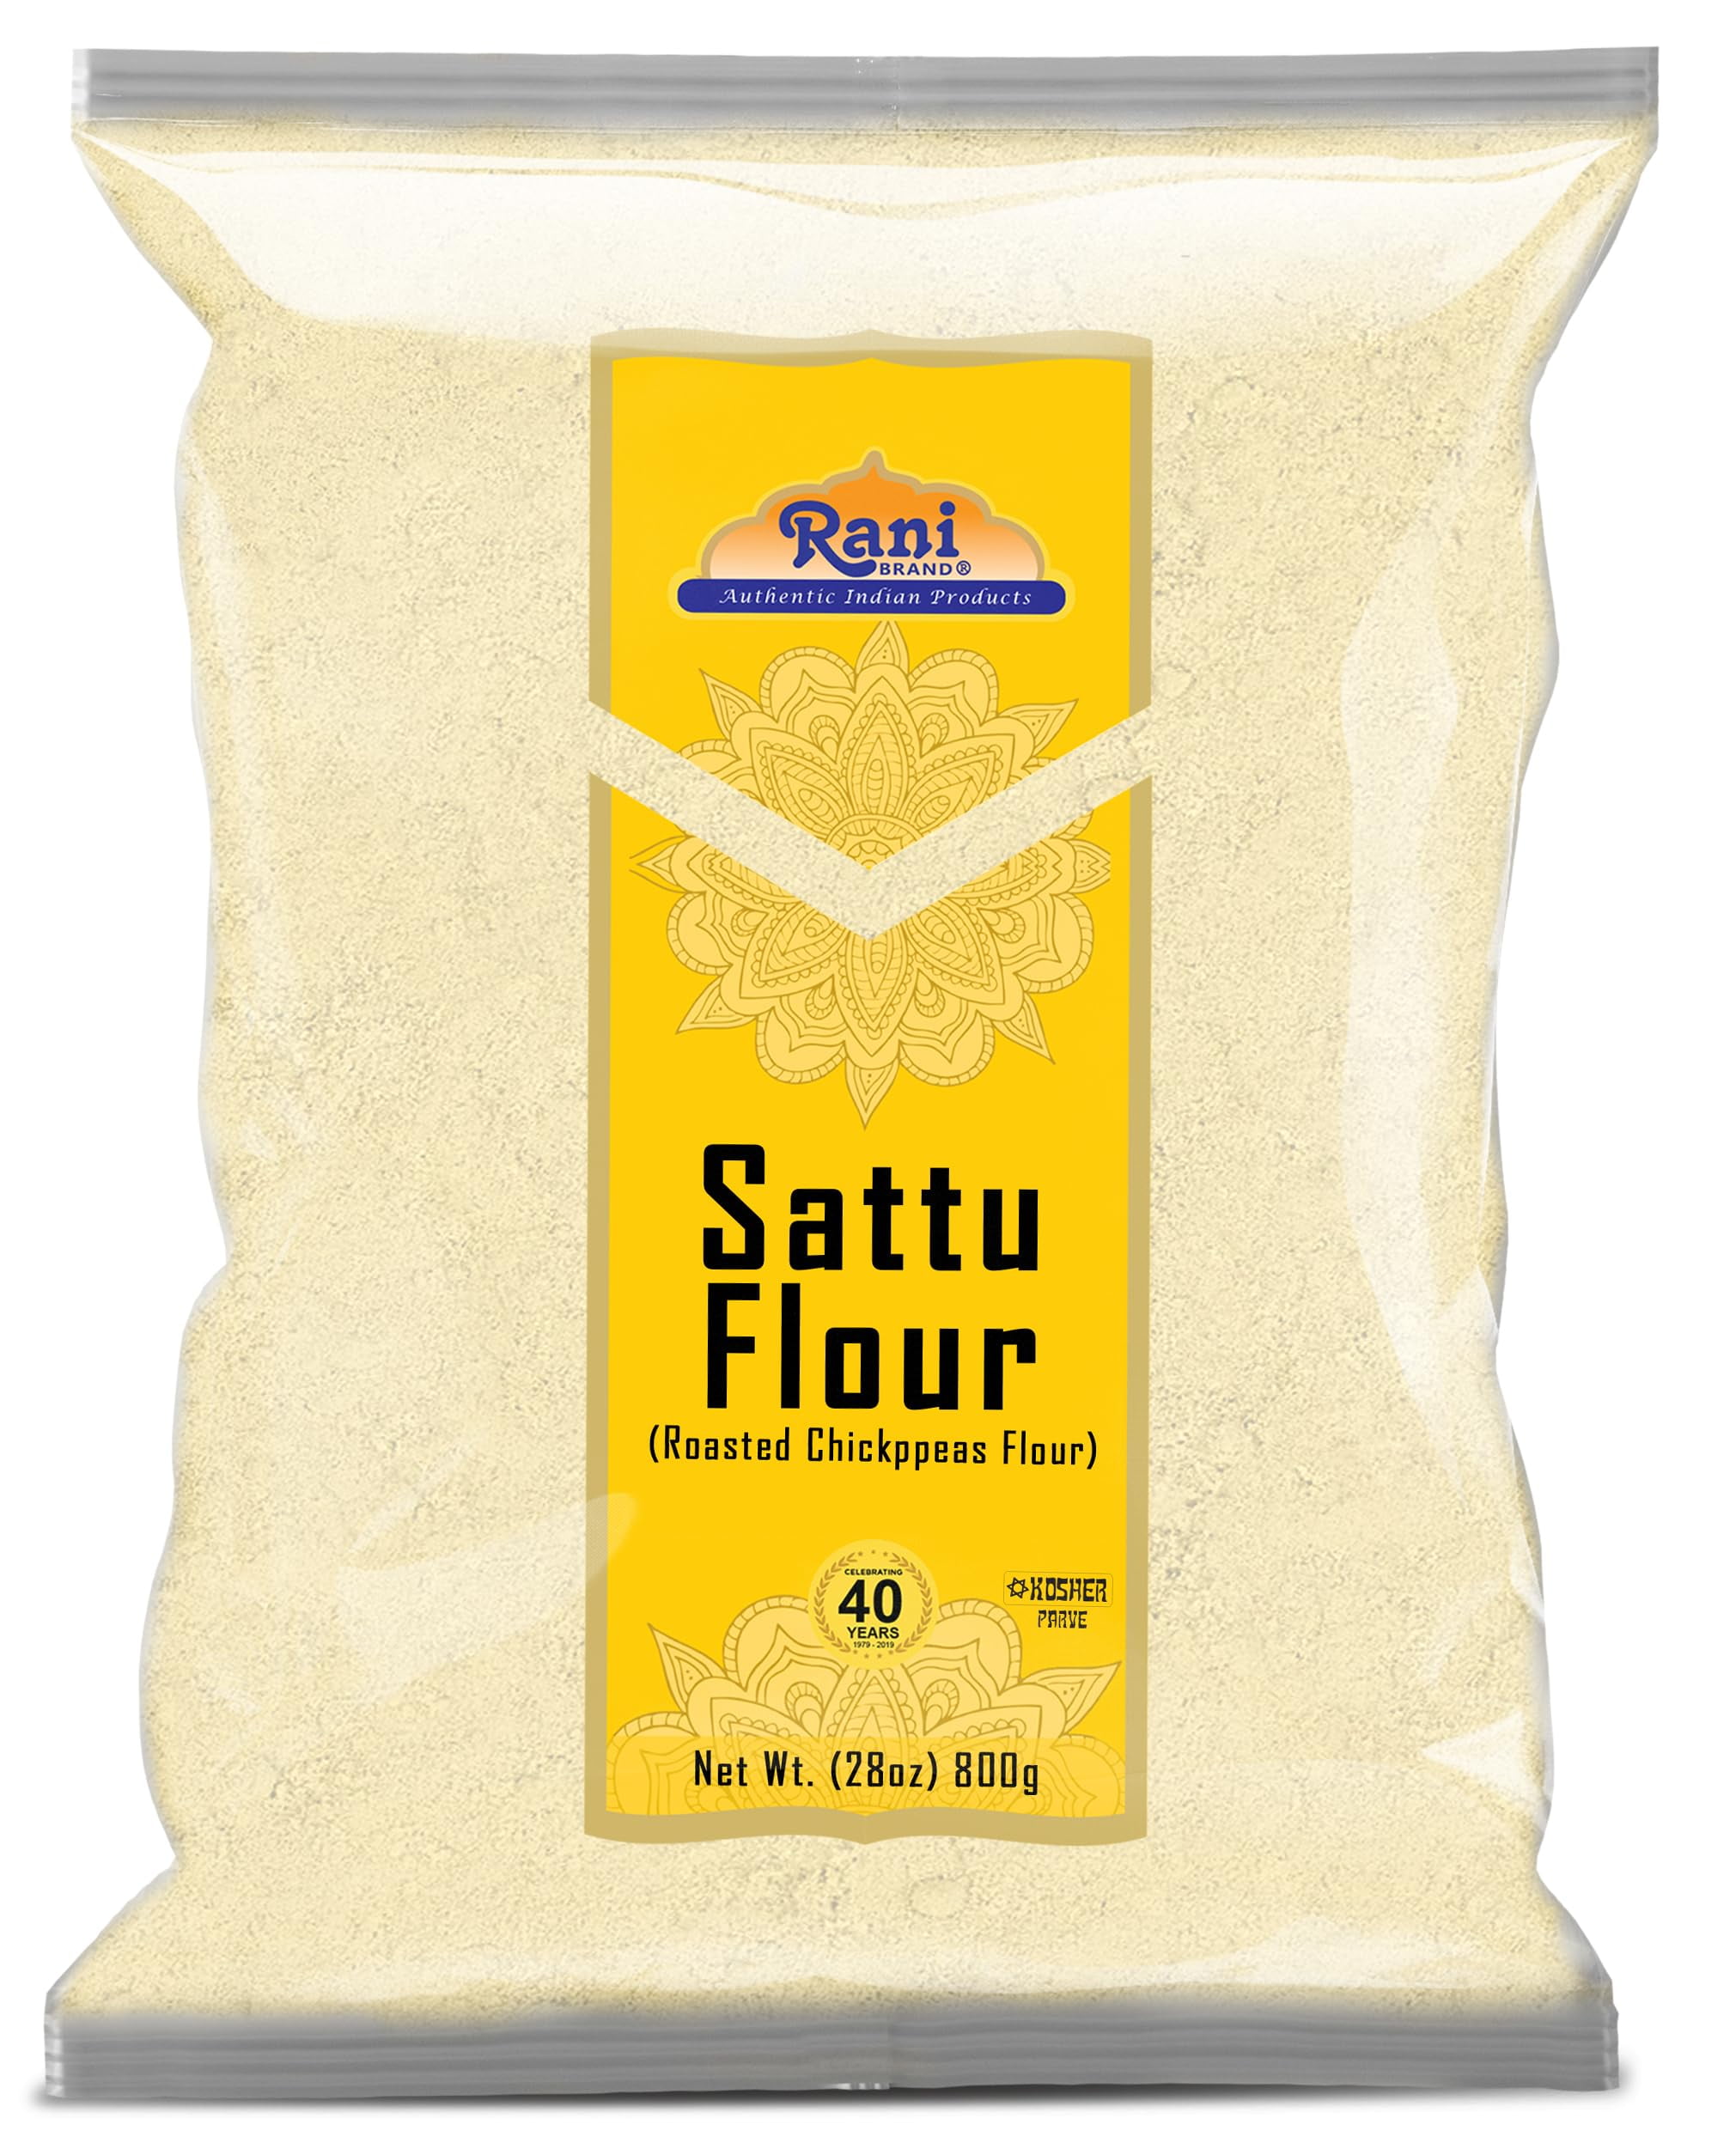 Cape Crystal Brands Sodium Alginate Powder for Chefs and Cooks, 2